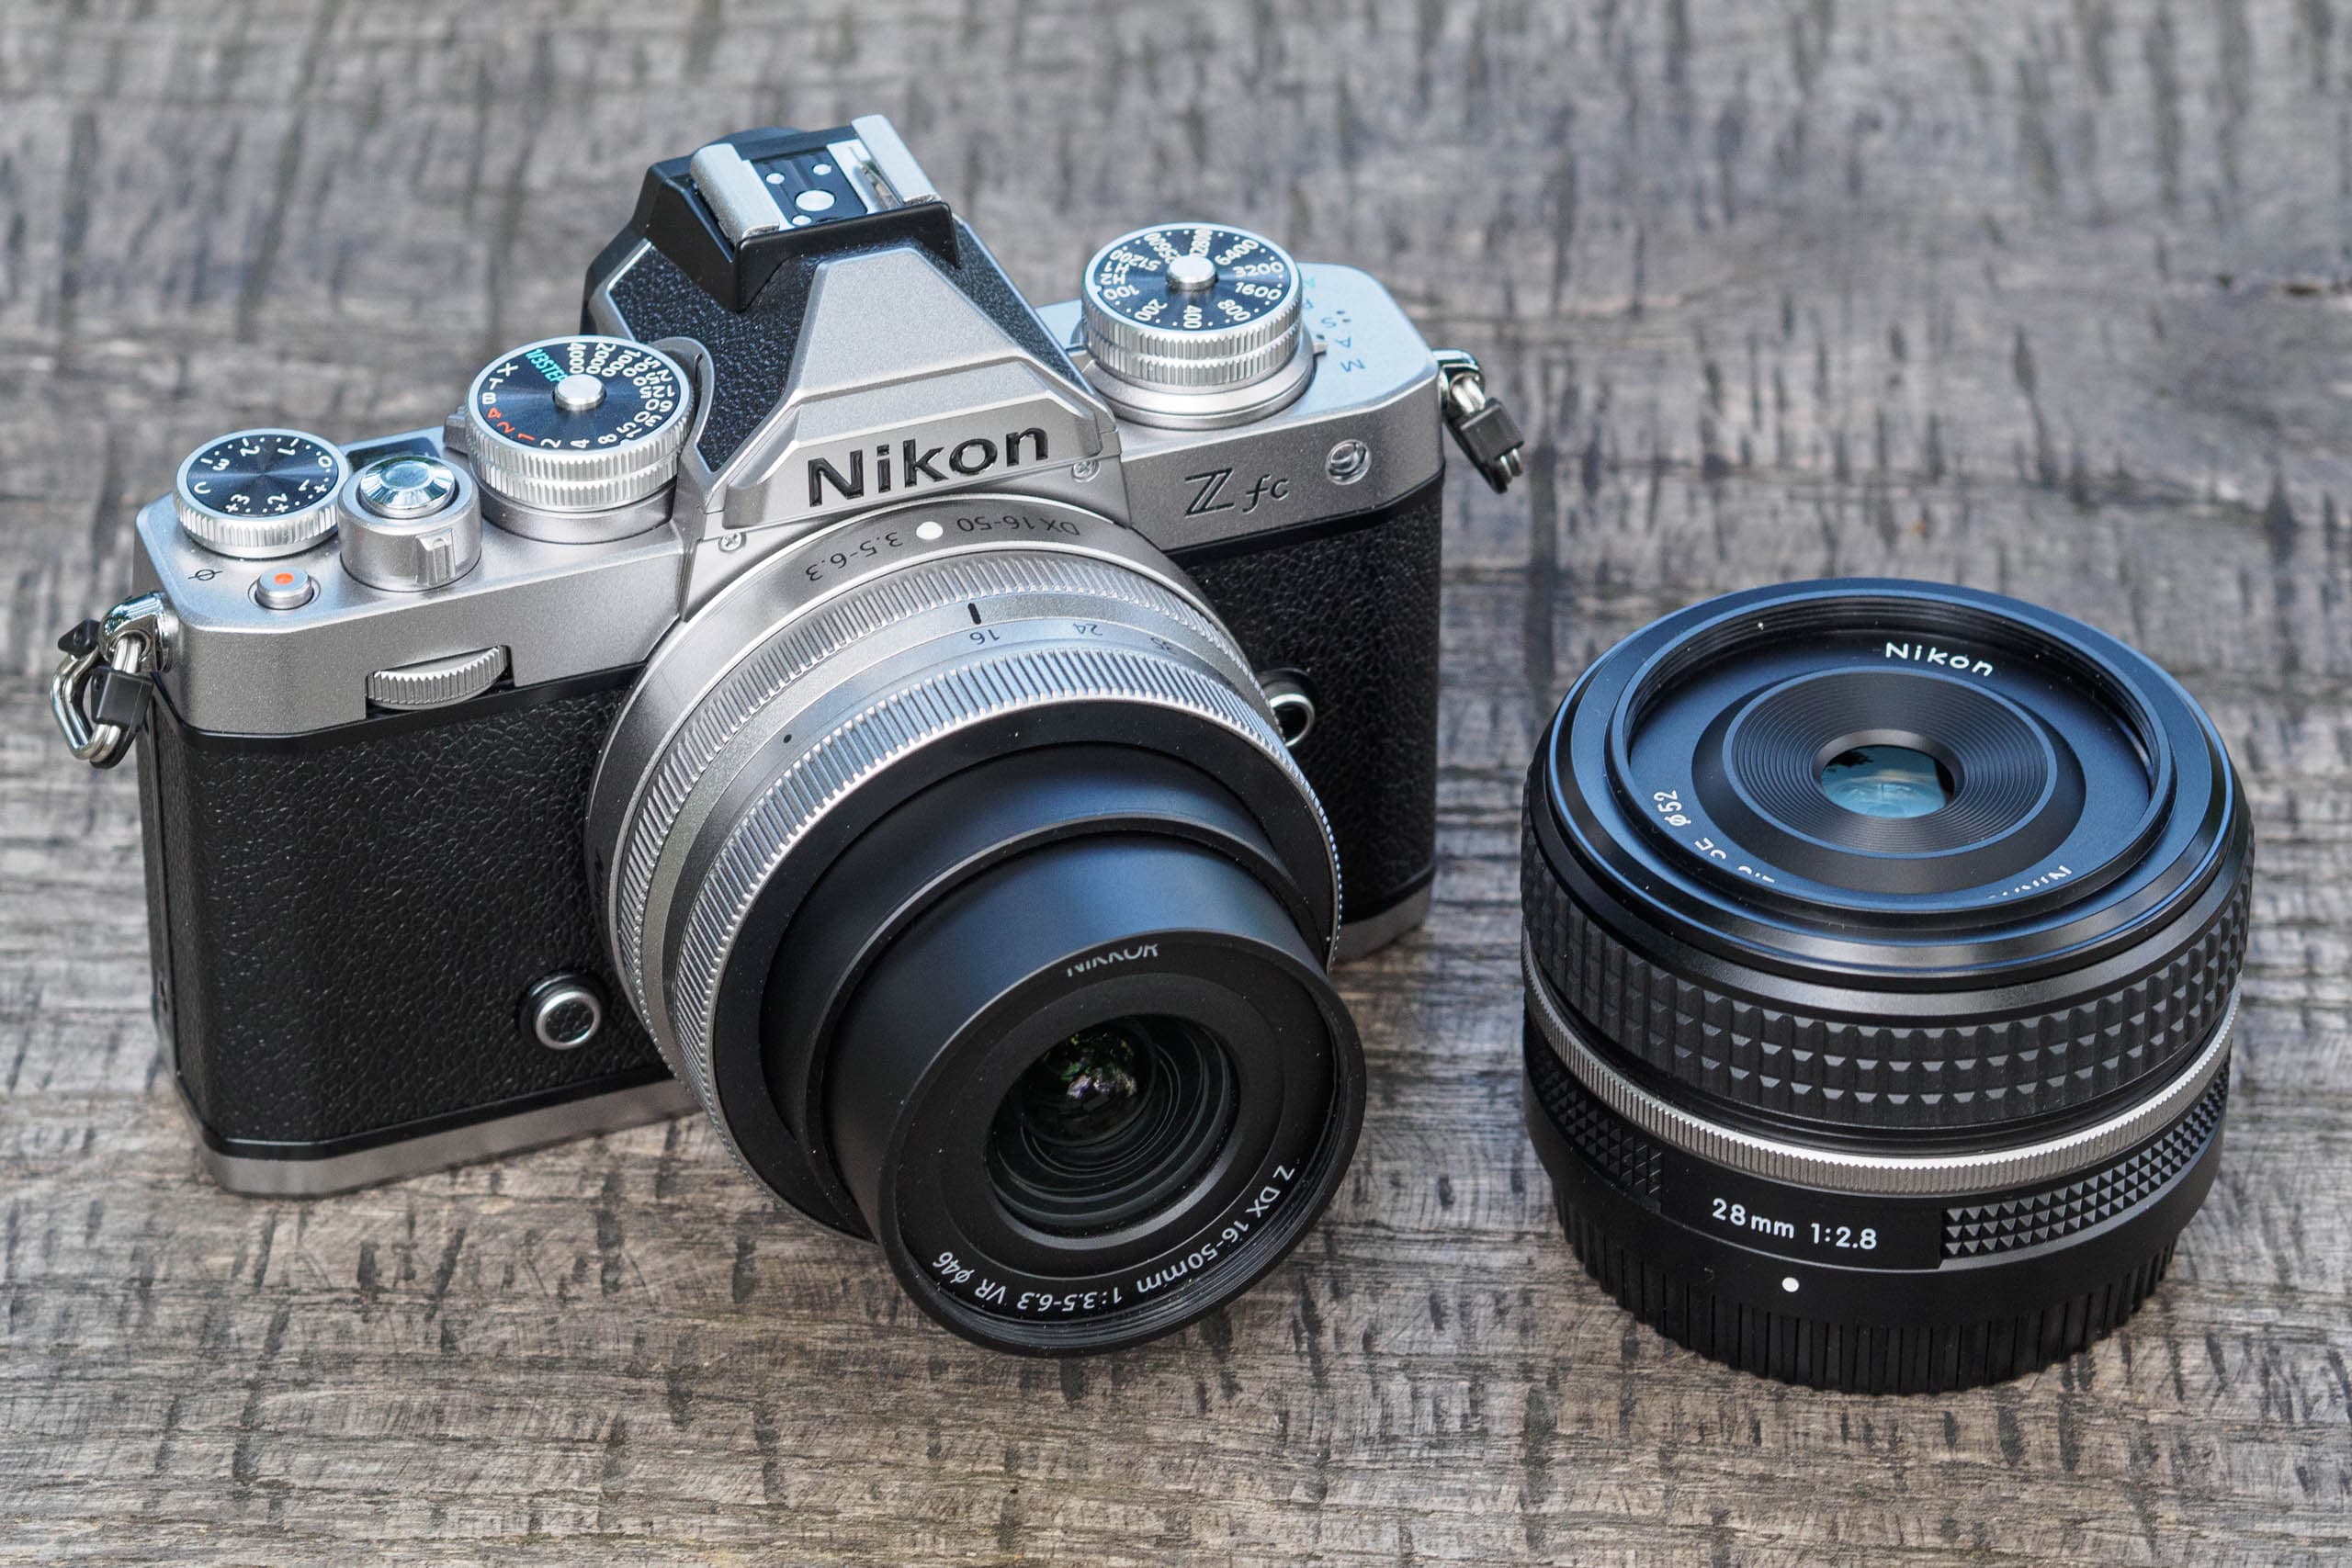 Hands-on with the Nikon Z fc: Digital Photography Review